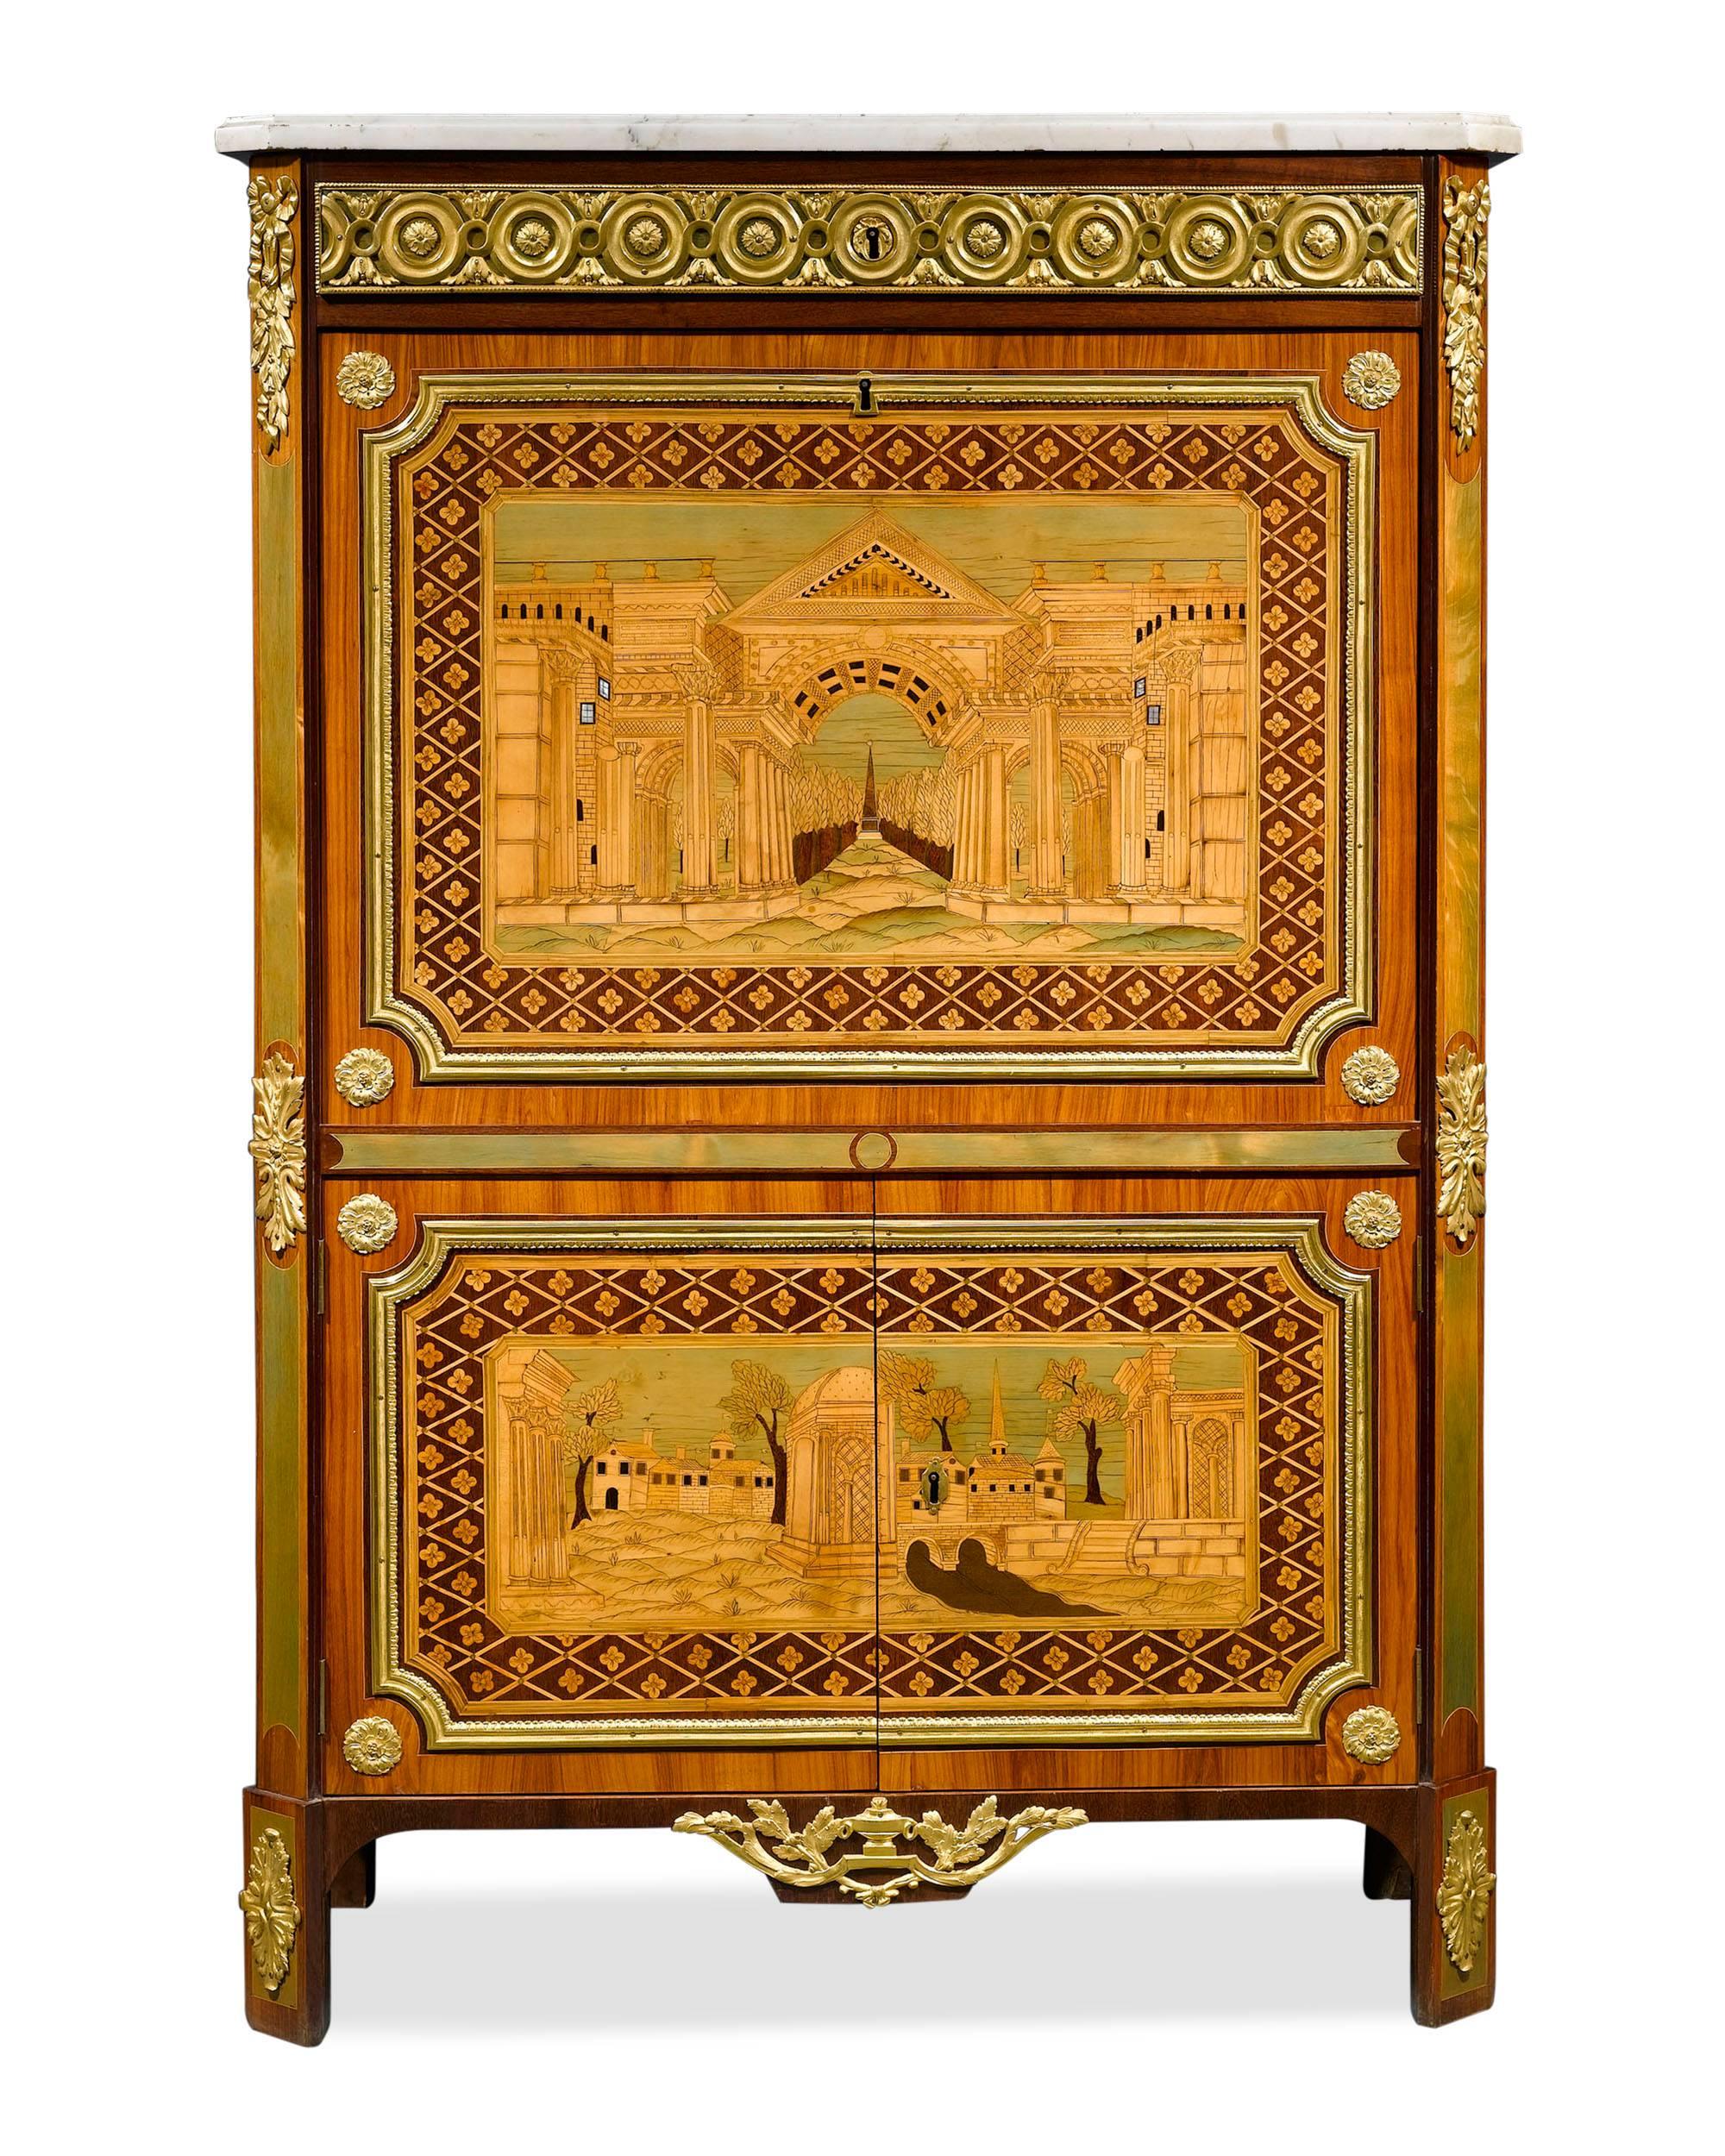 This elegant Louis XVI secrétaire à abattant was crafted by the master ébéniste André Gilbert, a craftsman renowned for his extraordinary talent for marquetry. This cabinet is a superb example of his architectural inlaid designs, featuring colorful